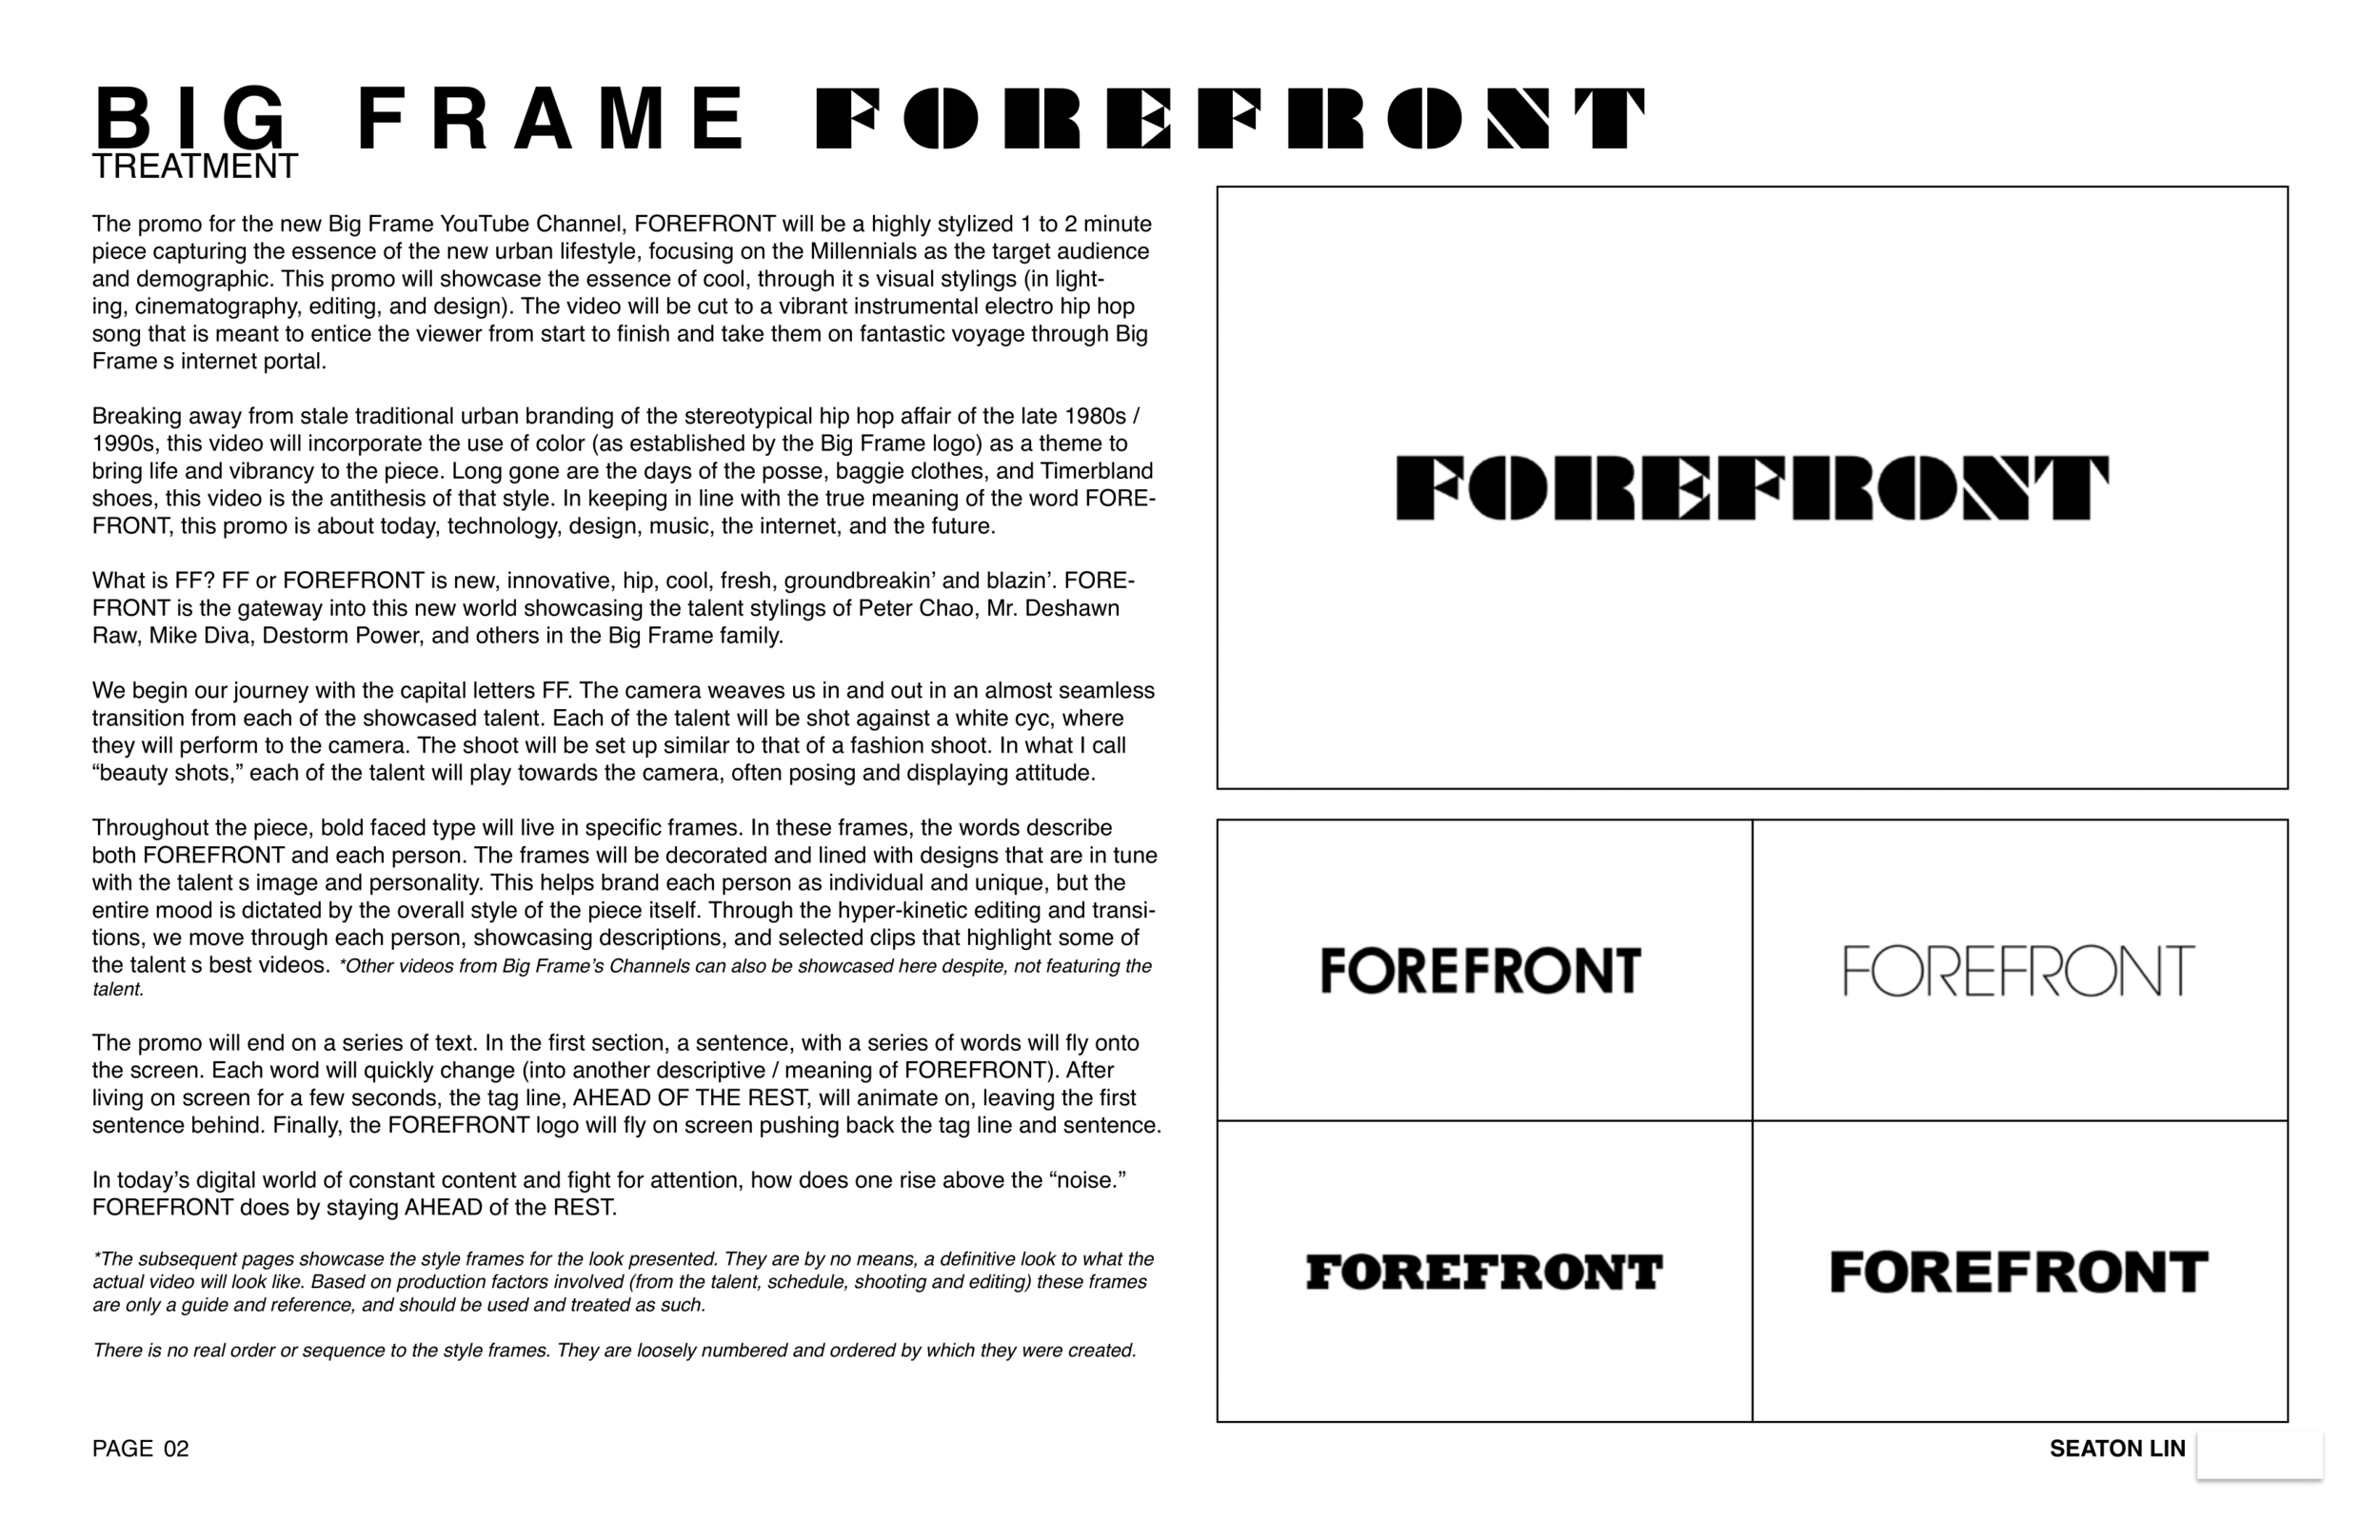 BigFrame_ForeFront_Treatment_SeatonLin-02.png